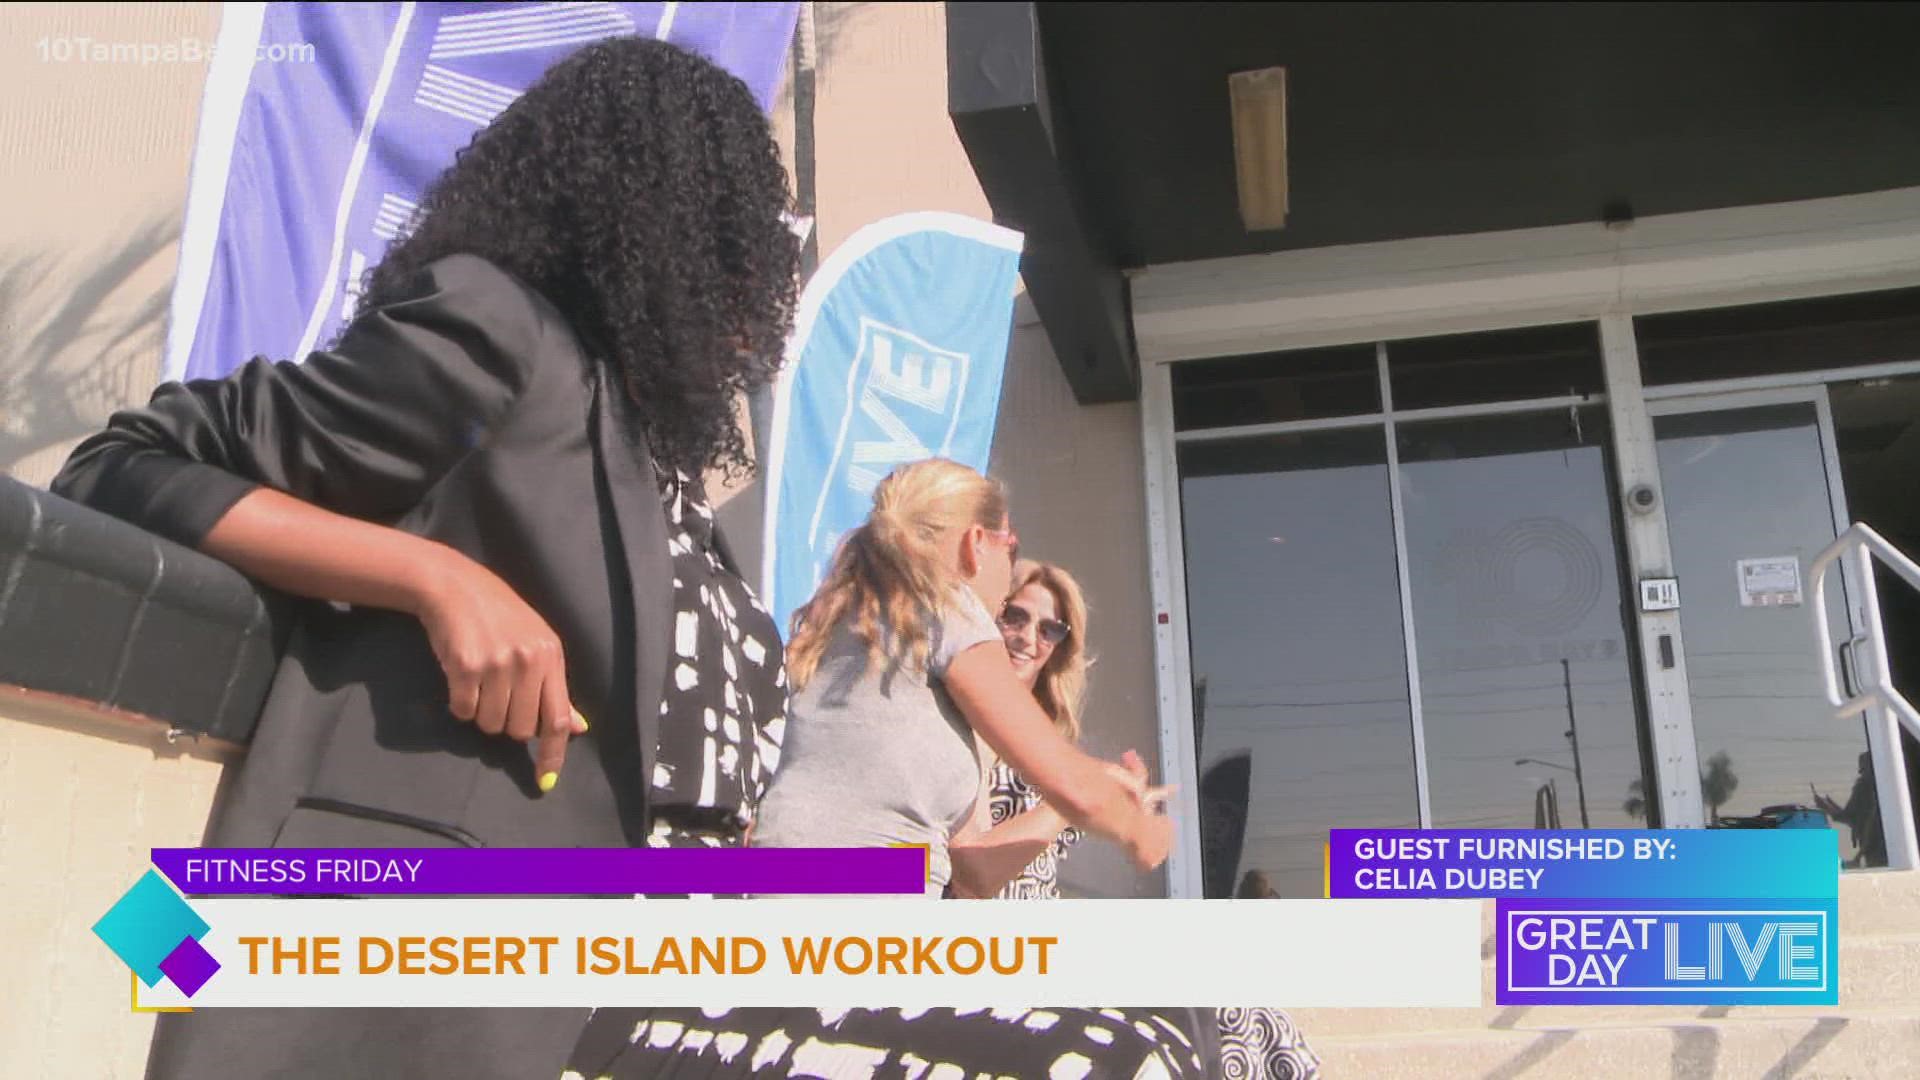 Trainer and fitness expert Ceilia Dubey joined GDL once again to show us a workout you can do from anywhere!